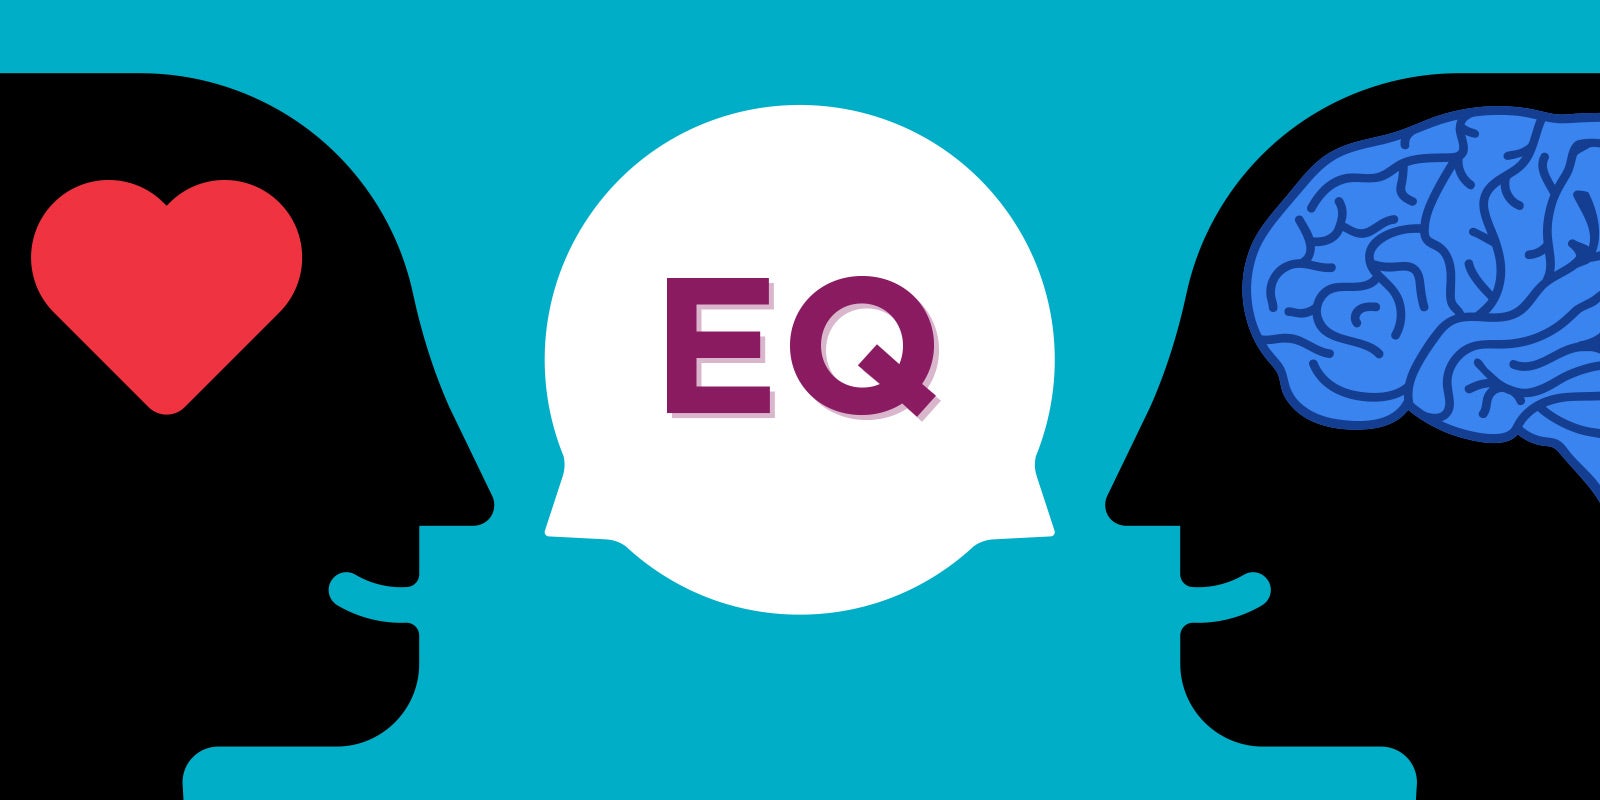 illustration of two heads, one on the left with a heart in the brain area, and the one on the right with just his brain, and in the middle is a word bubble with the word "EQ" in it, coming from each of the heads' mouths to show this post is about emotional intelligence competencies for leaders